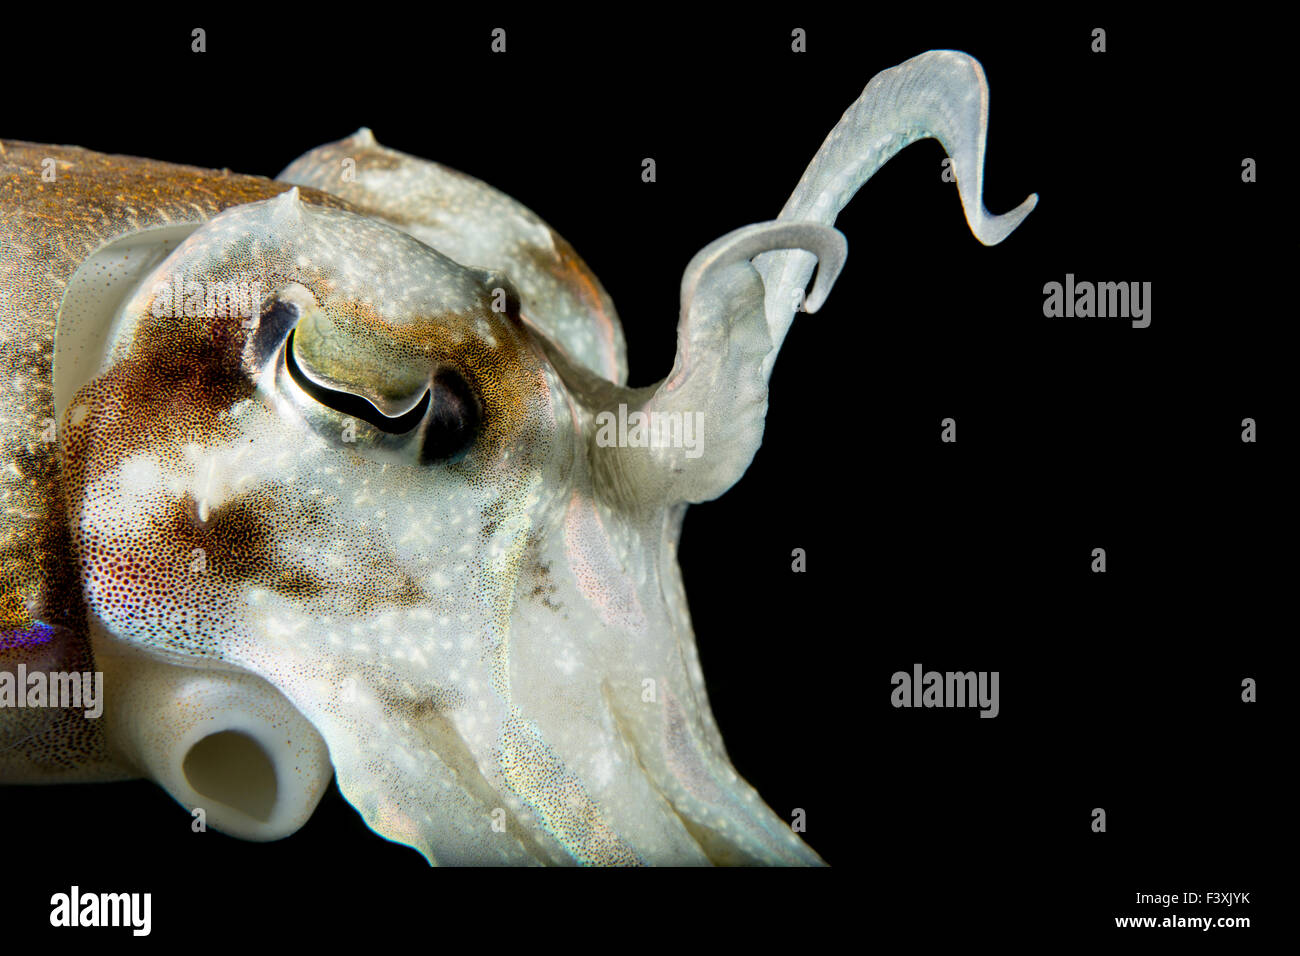 Threatening Broadclub Cuttlefish Displaying Tentacles on Black Background Stock Photo